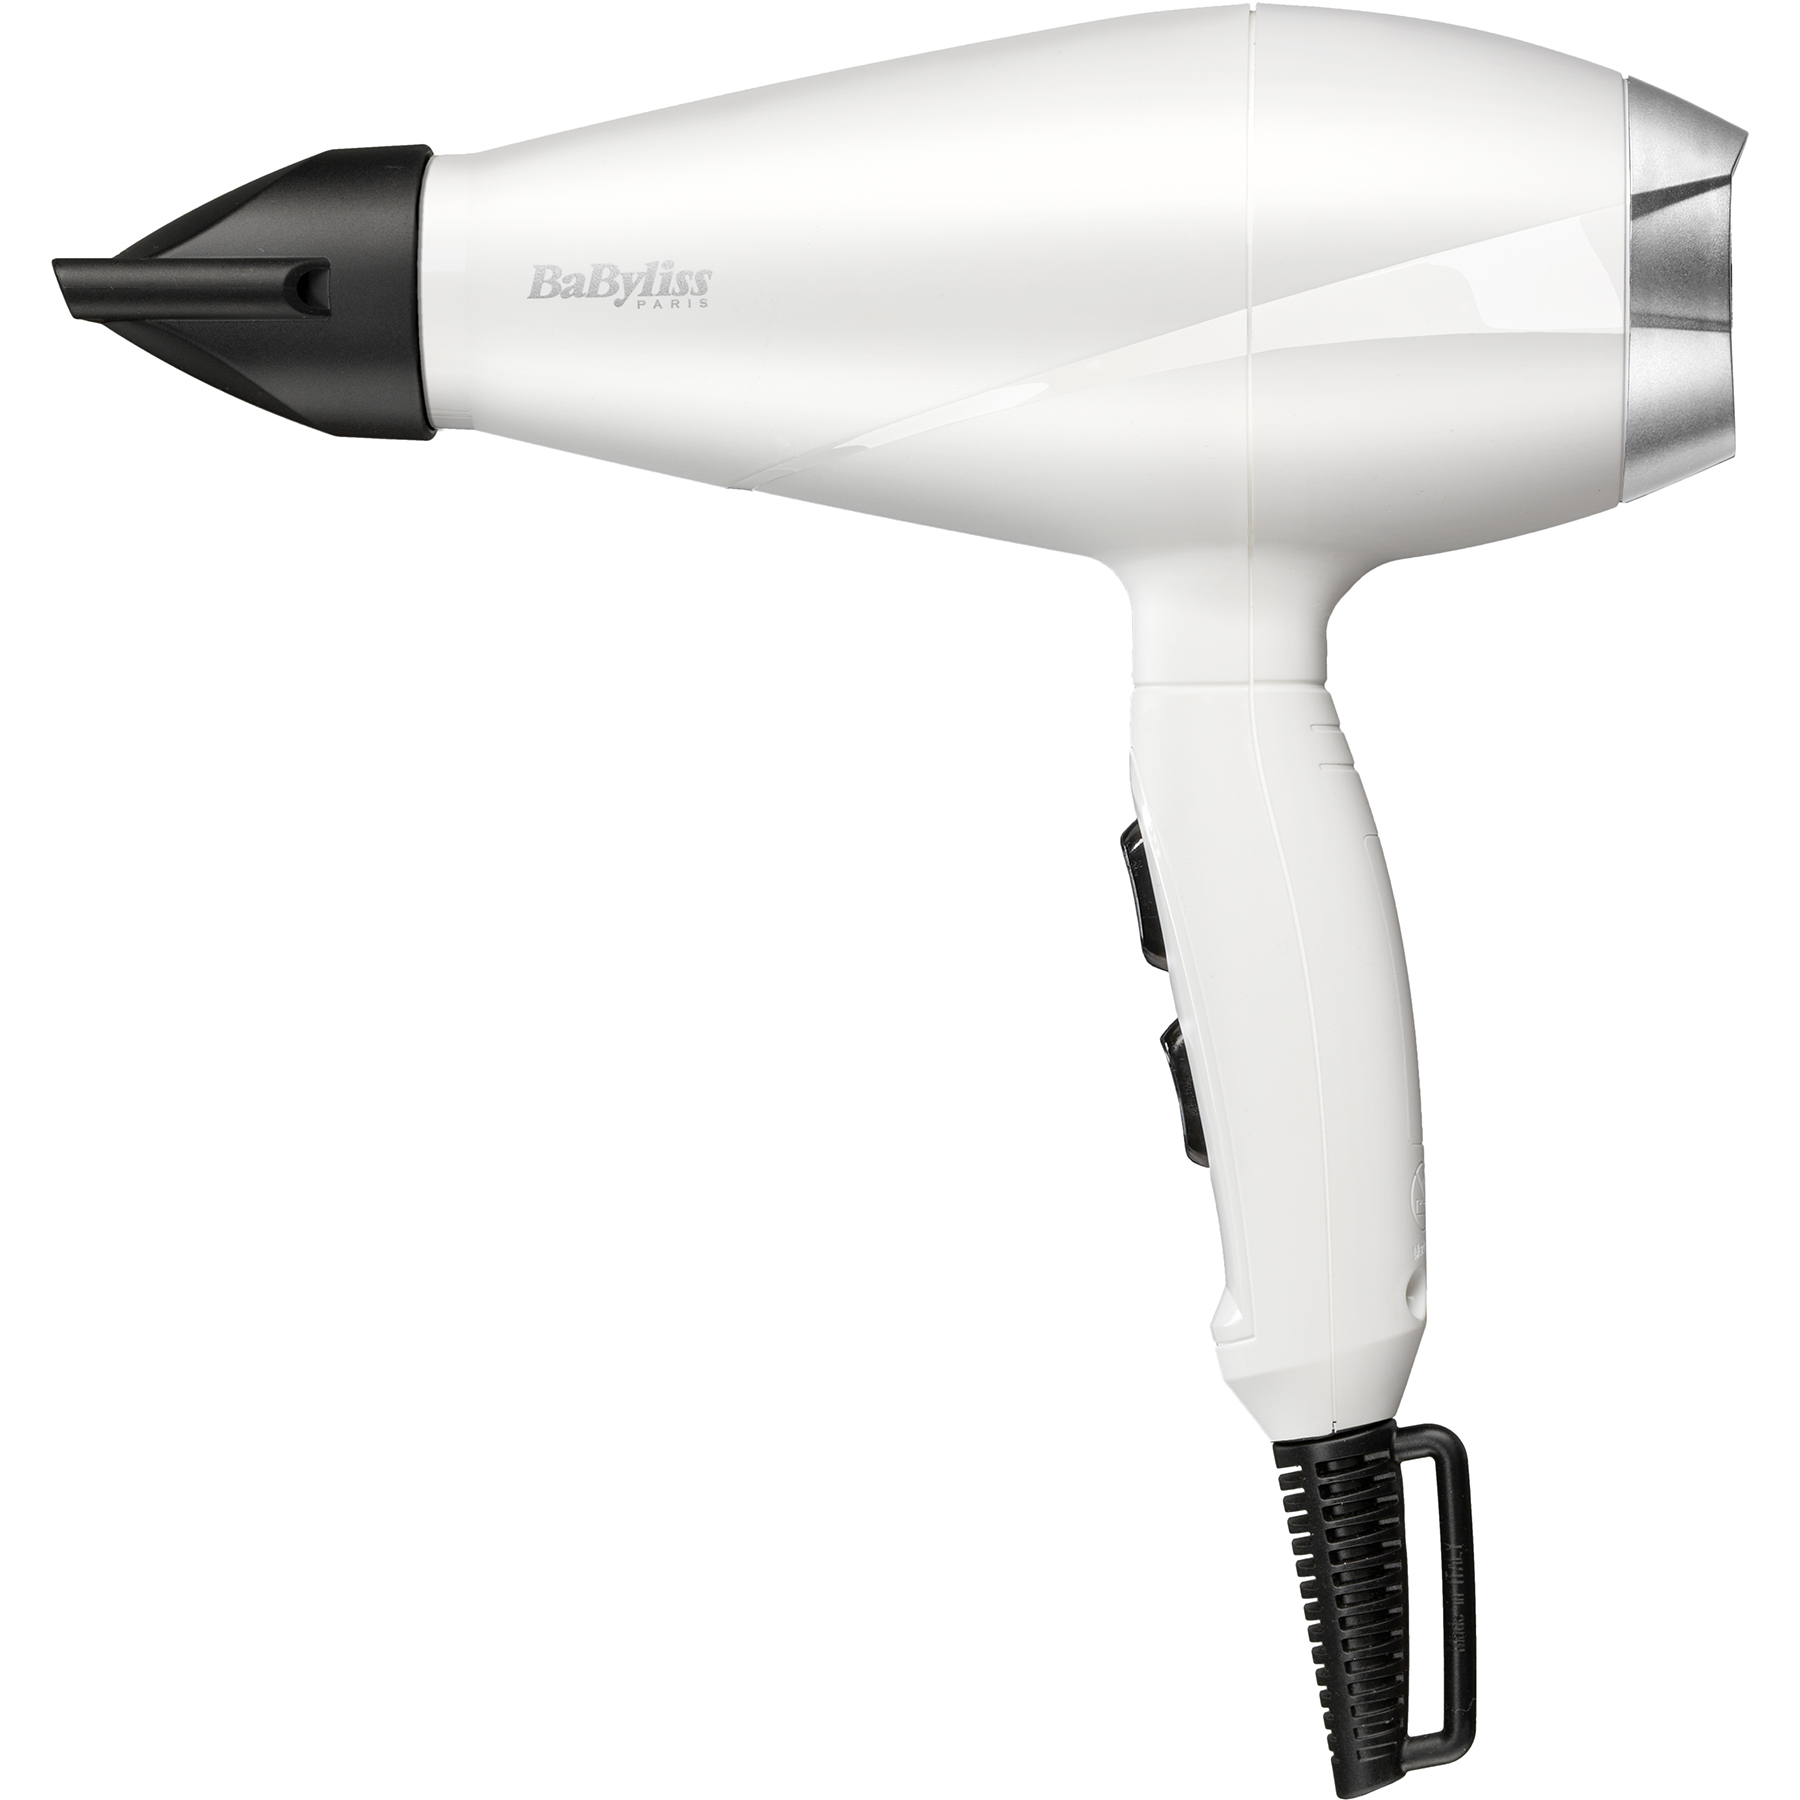 Фен Babyliss 6704WE фен babyliss 6704we white and black 1 шт